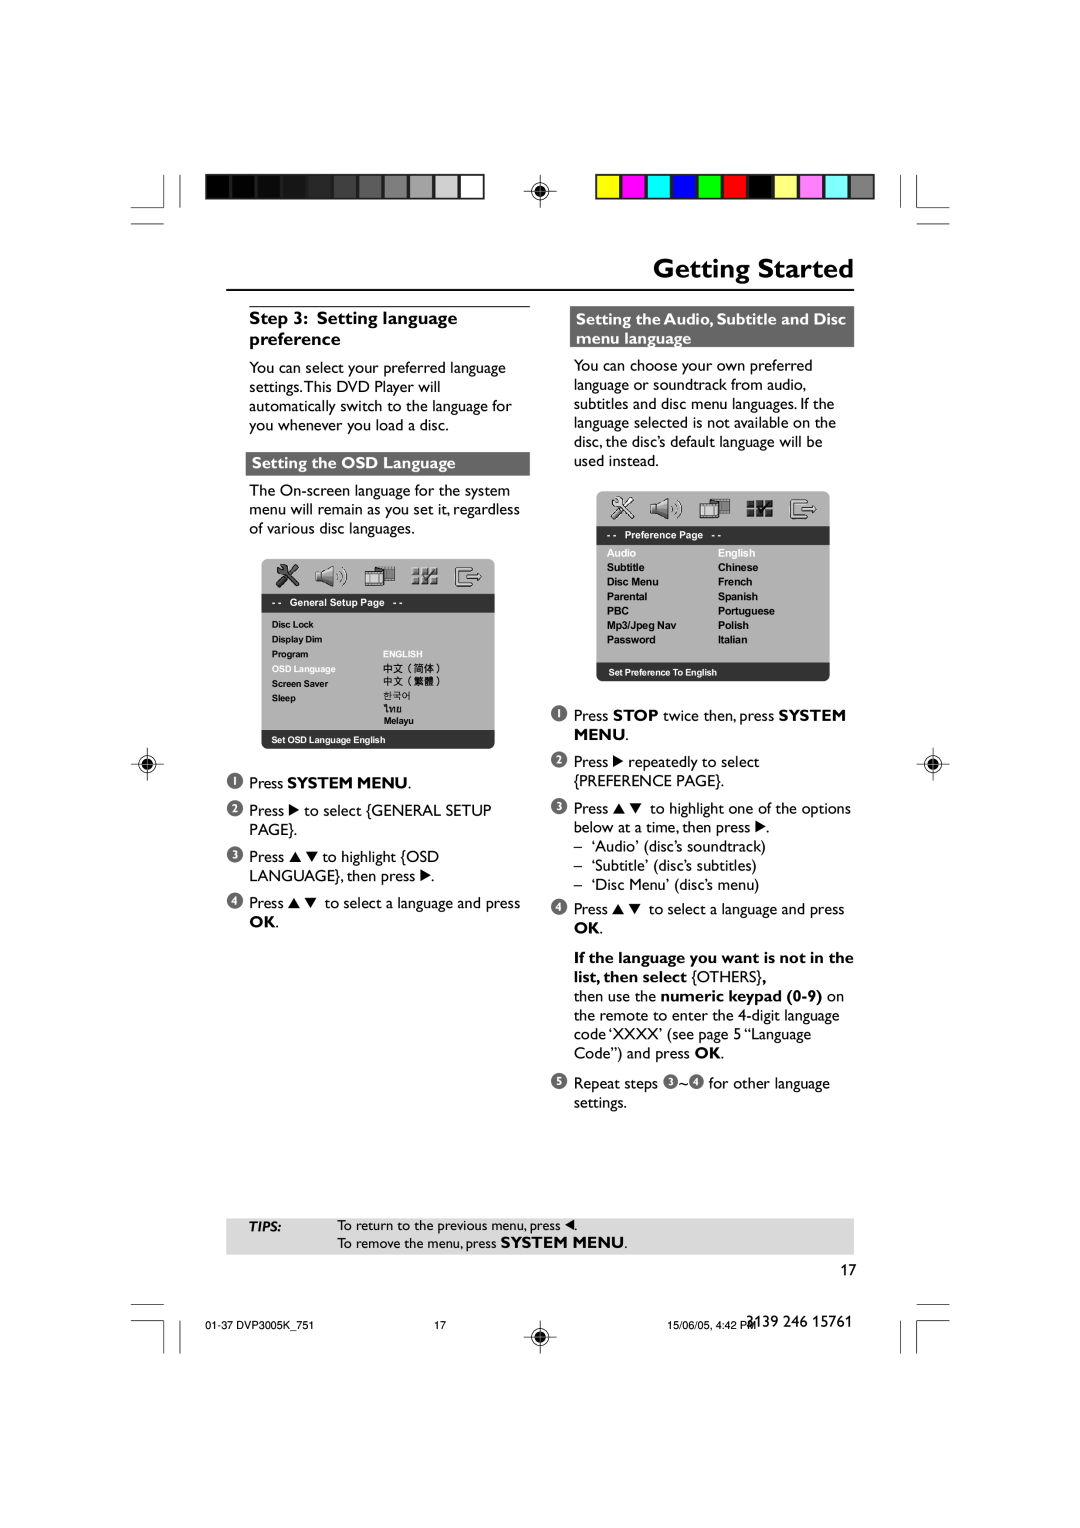 Philips DVP3005K/74 user manual Setting language preference, Setting the OSD Language, Press SYSTEM MENU, Getting Started 